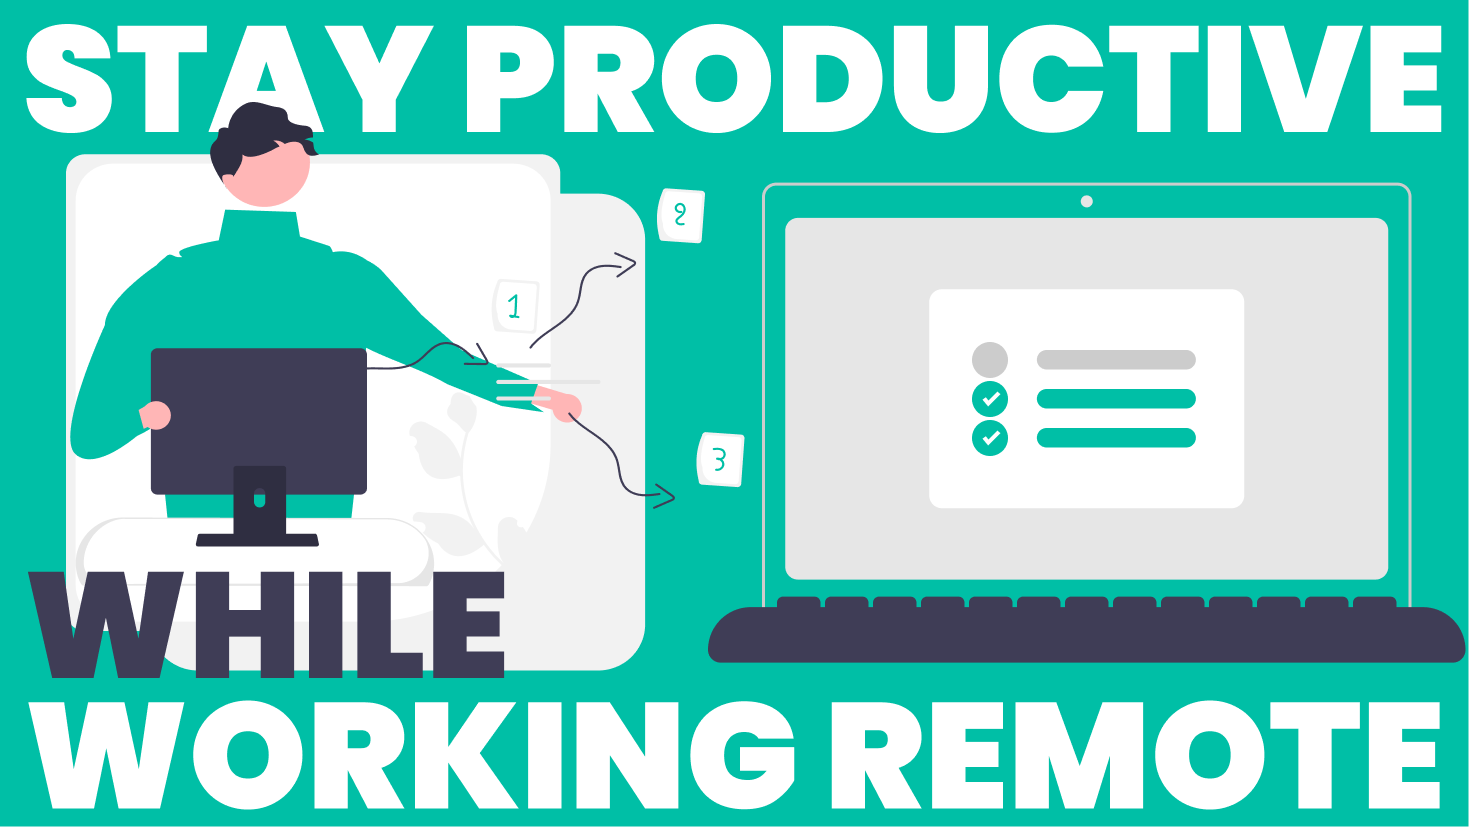 How to stay productive while working remotely?